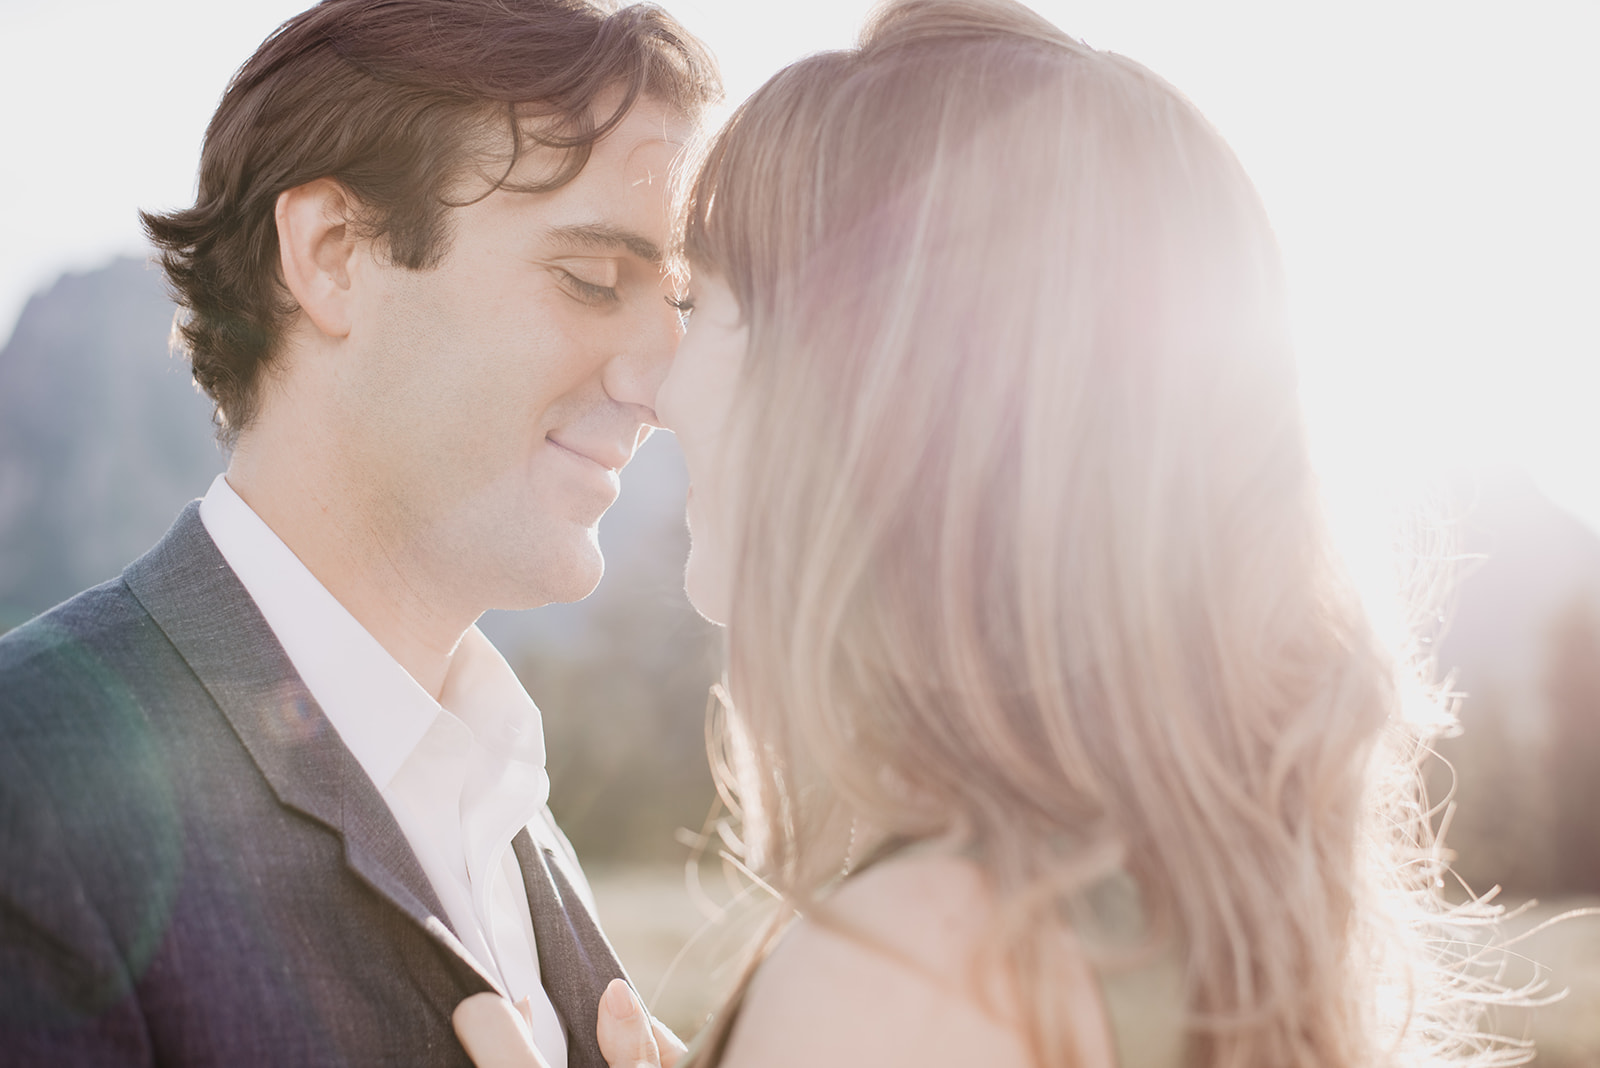 man and woman embracing close as they smile and the sun shine behind them gleaming through the couple